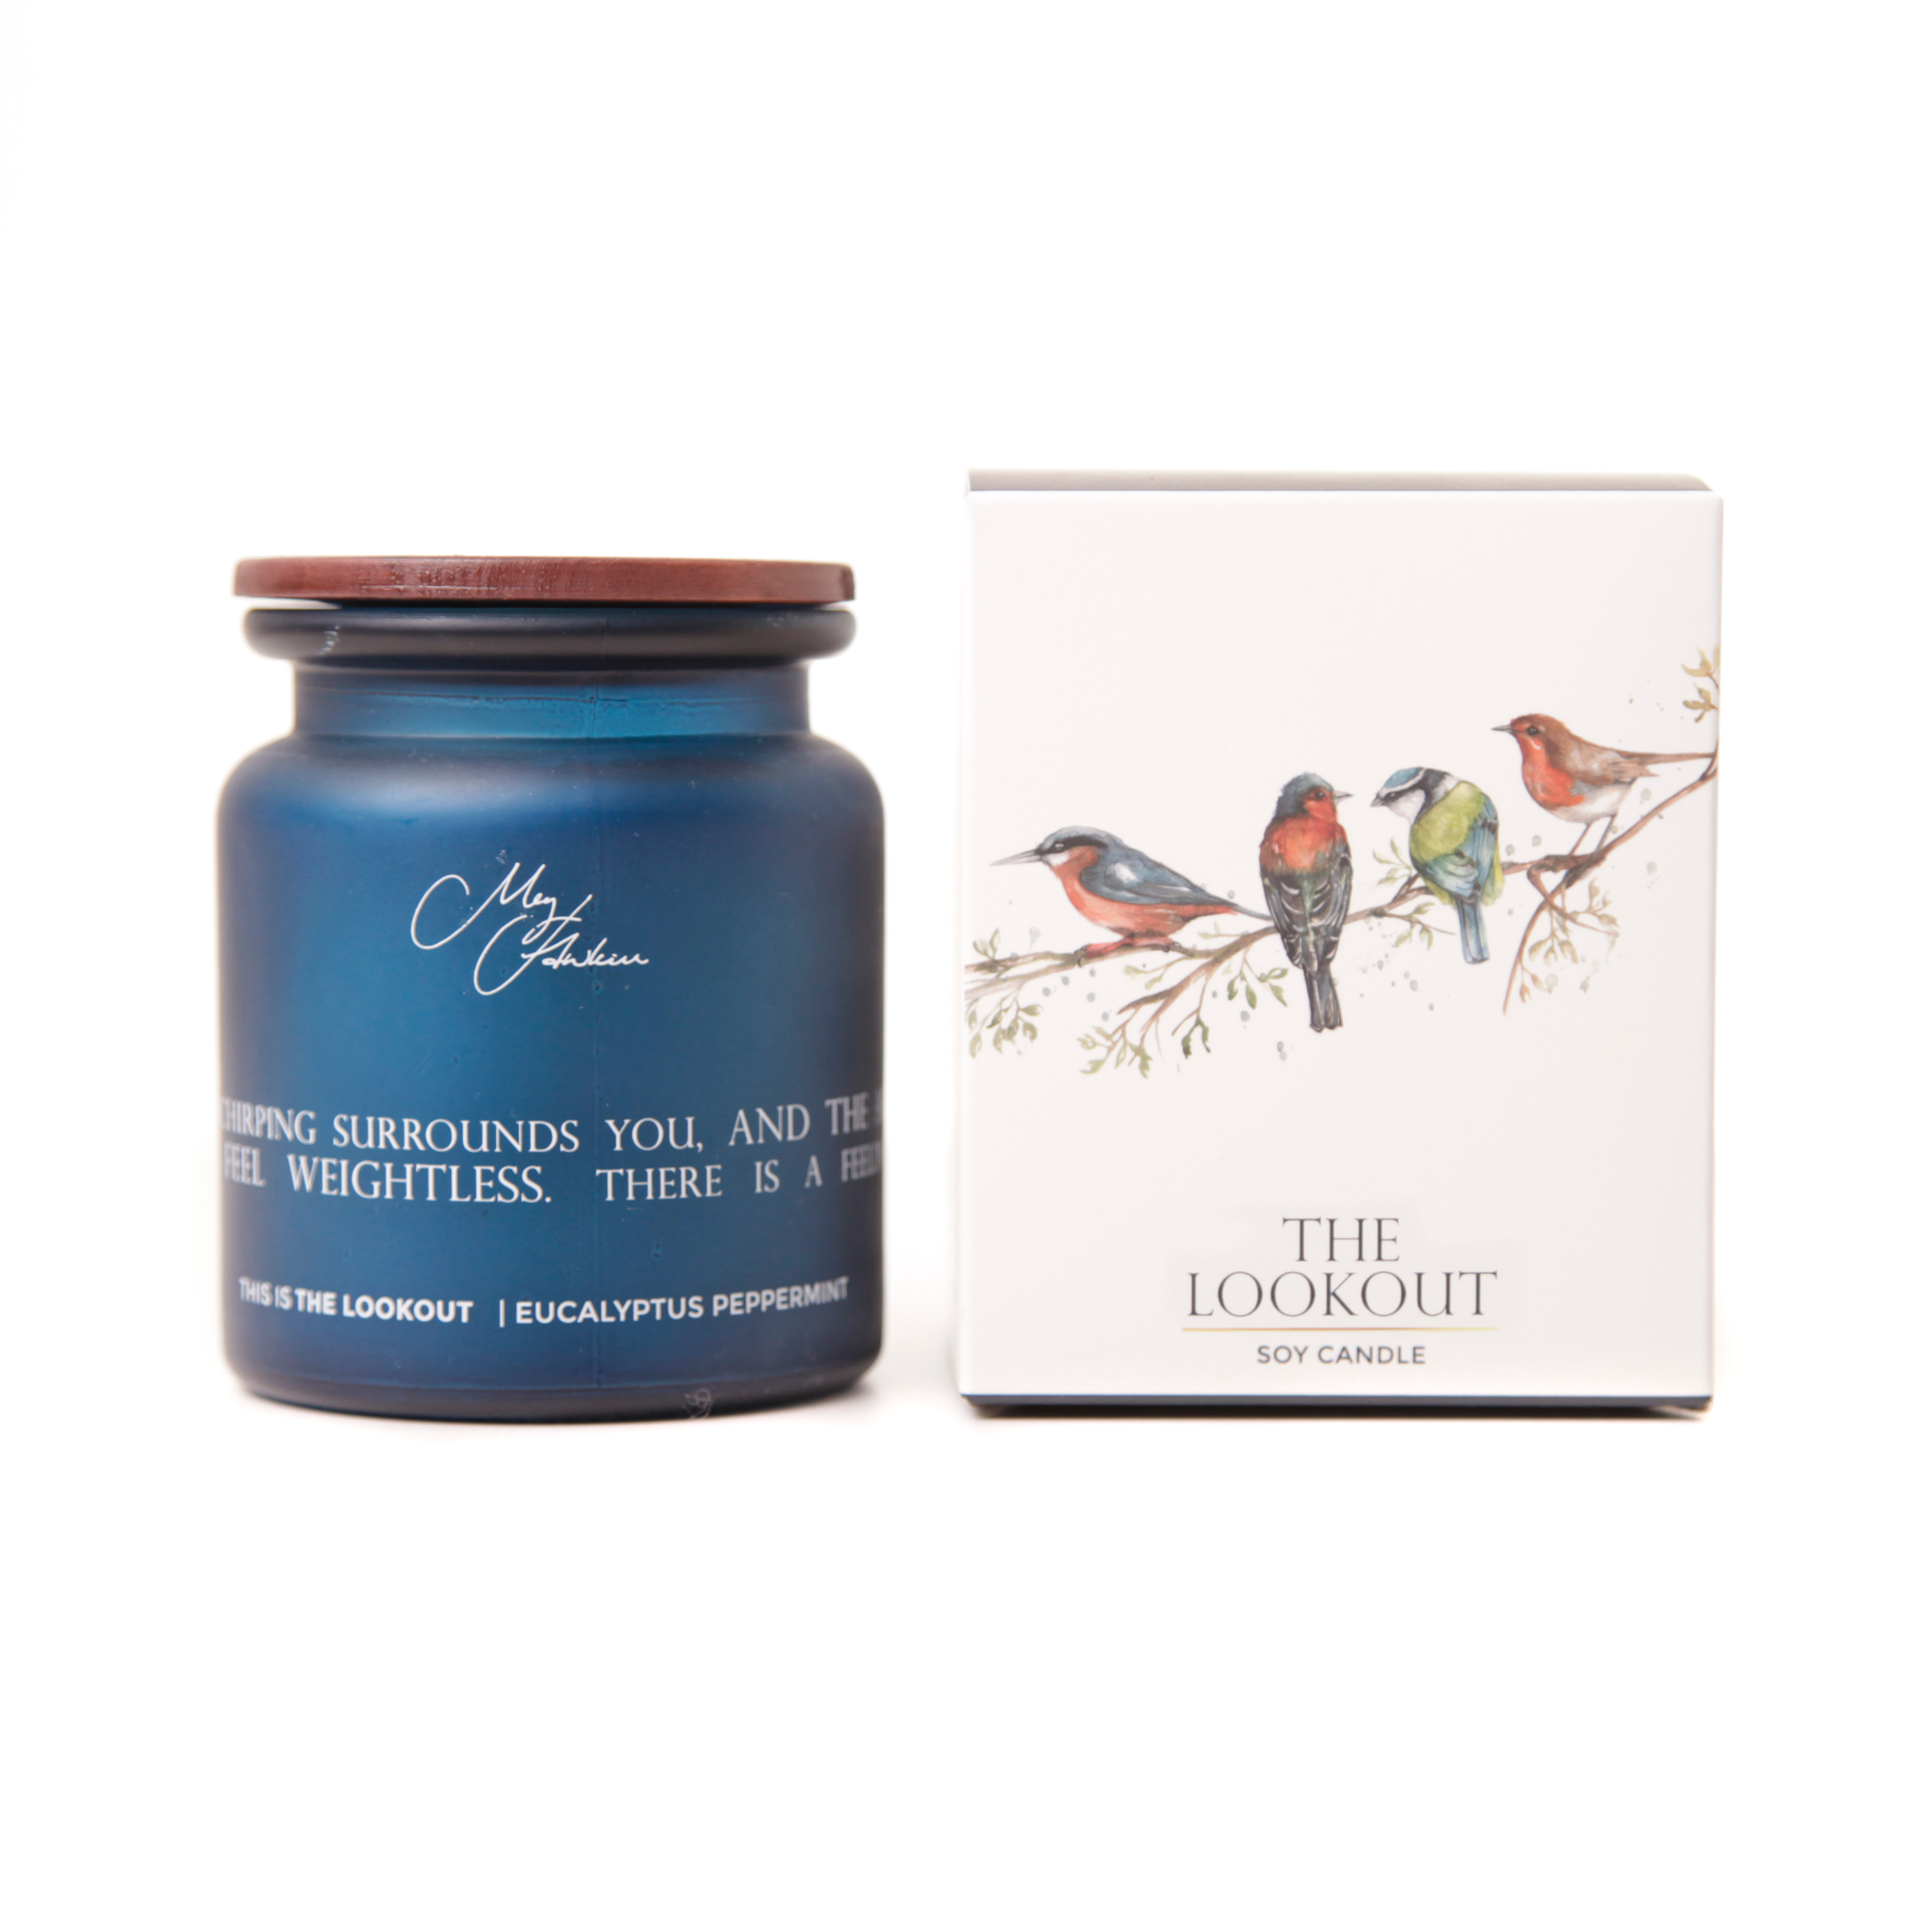 The Lookout' British Birds Design Candle